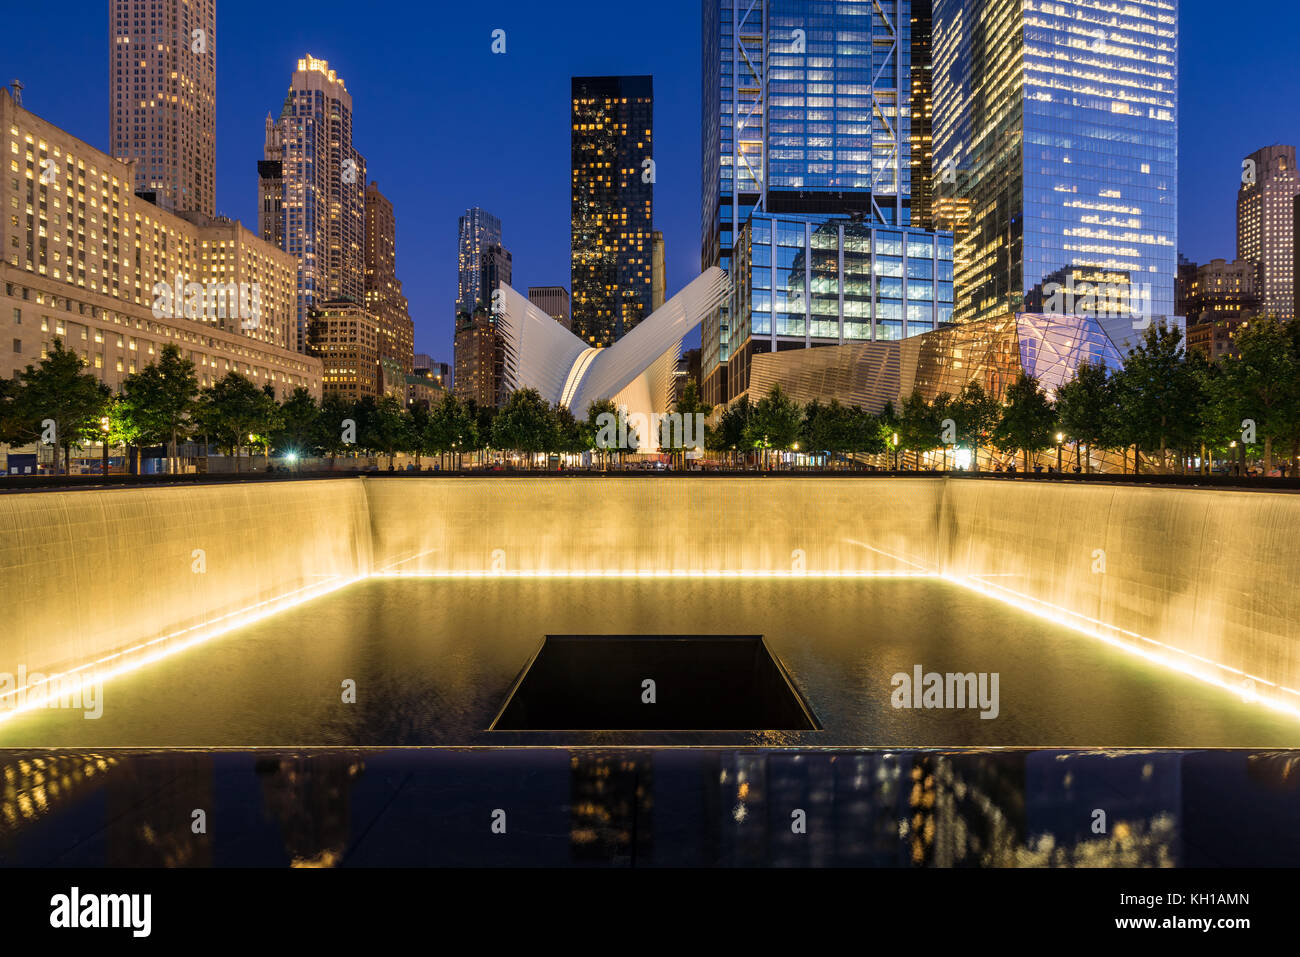 The North Reflecting Pool illuminated at twilight with view of the World Trade Center Tower 3 and 4 and the Oculus. Lower Manhattan, New York City Stock Photo